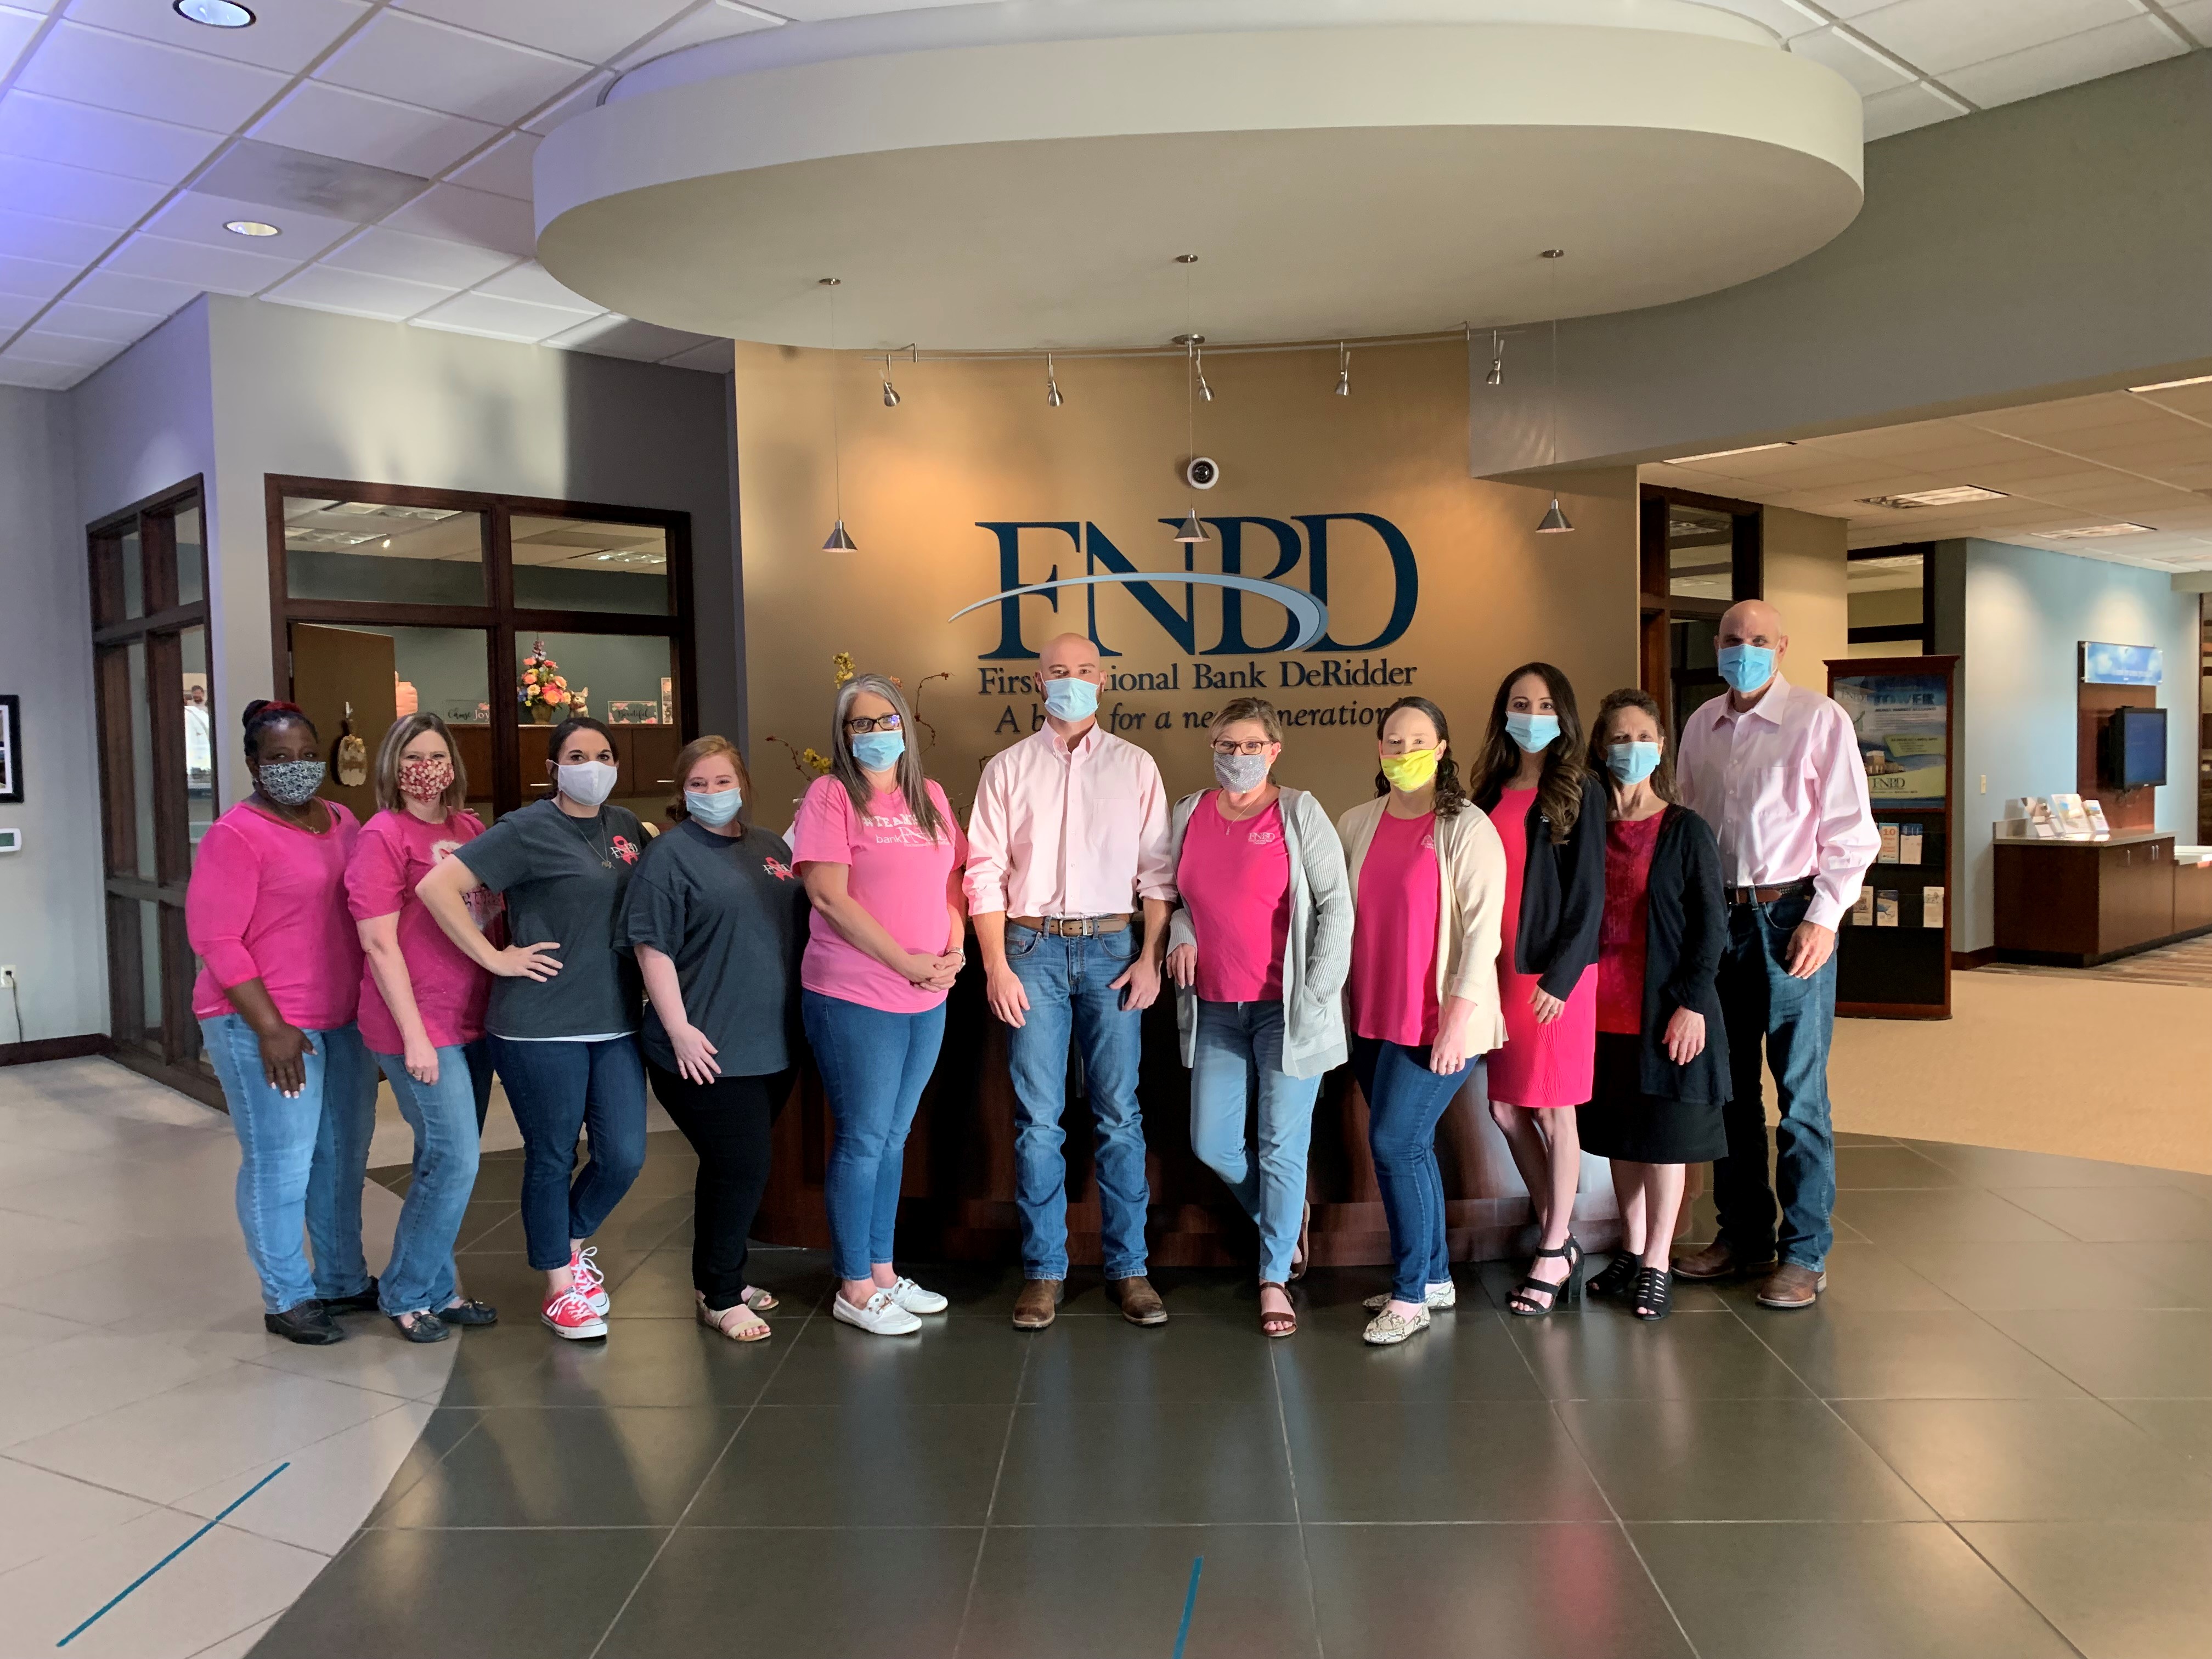 Bank FNBD "Paints The Town Pink"